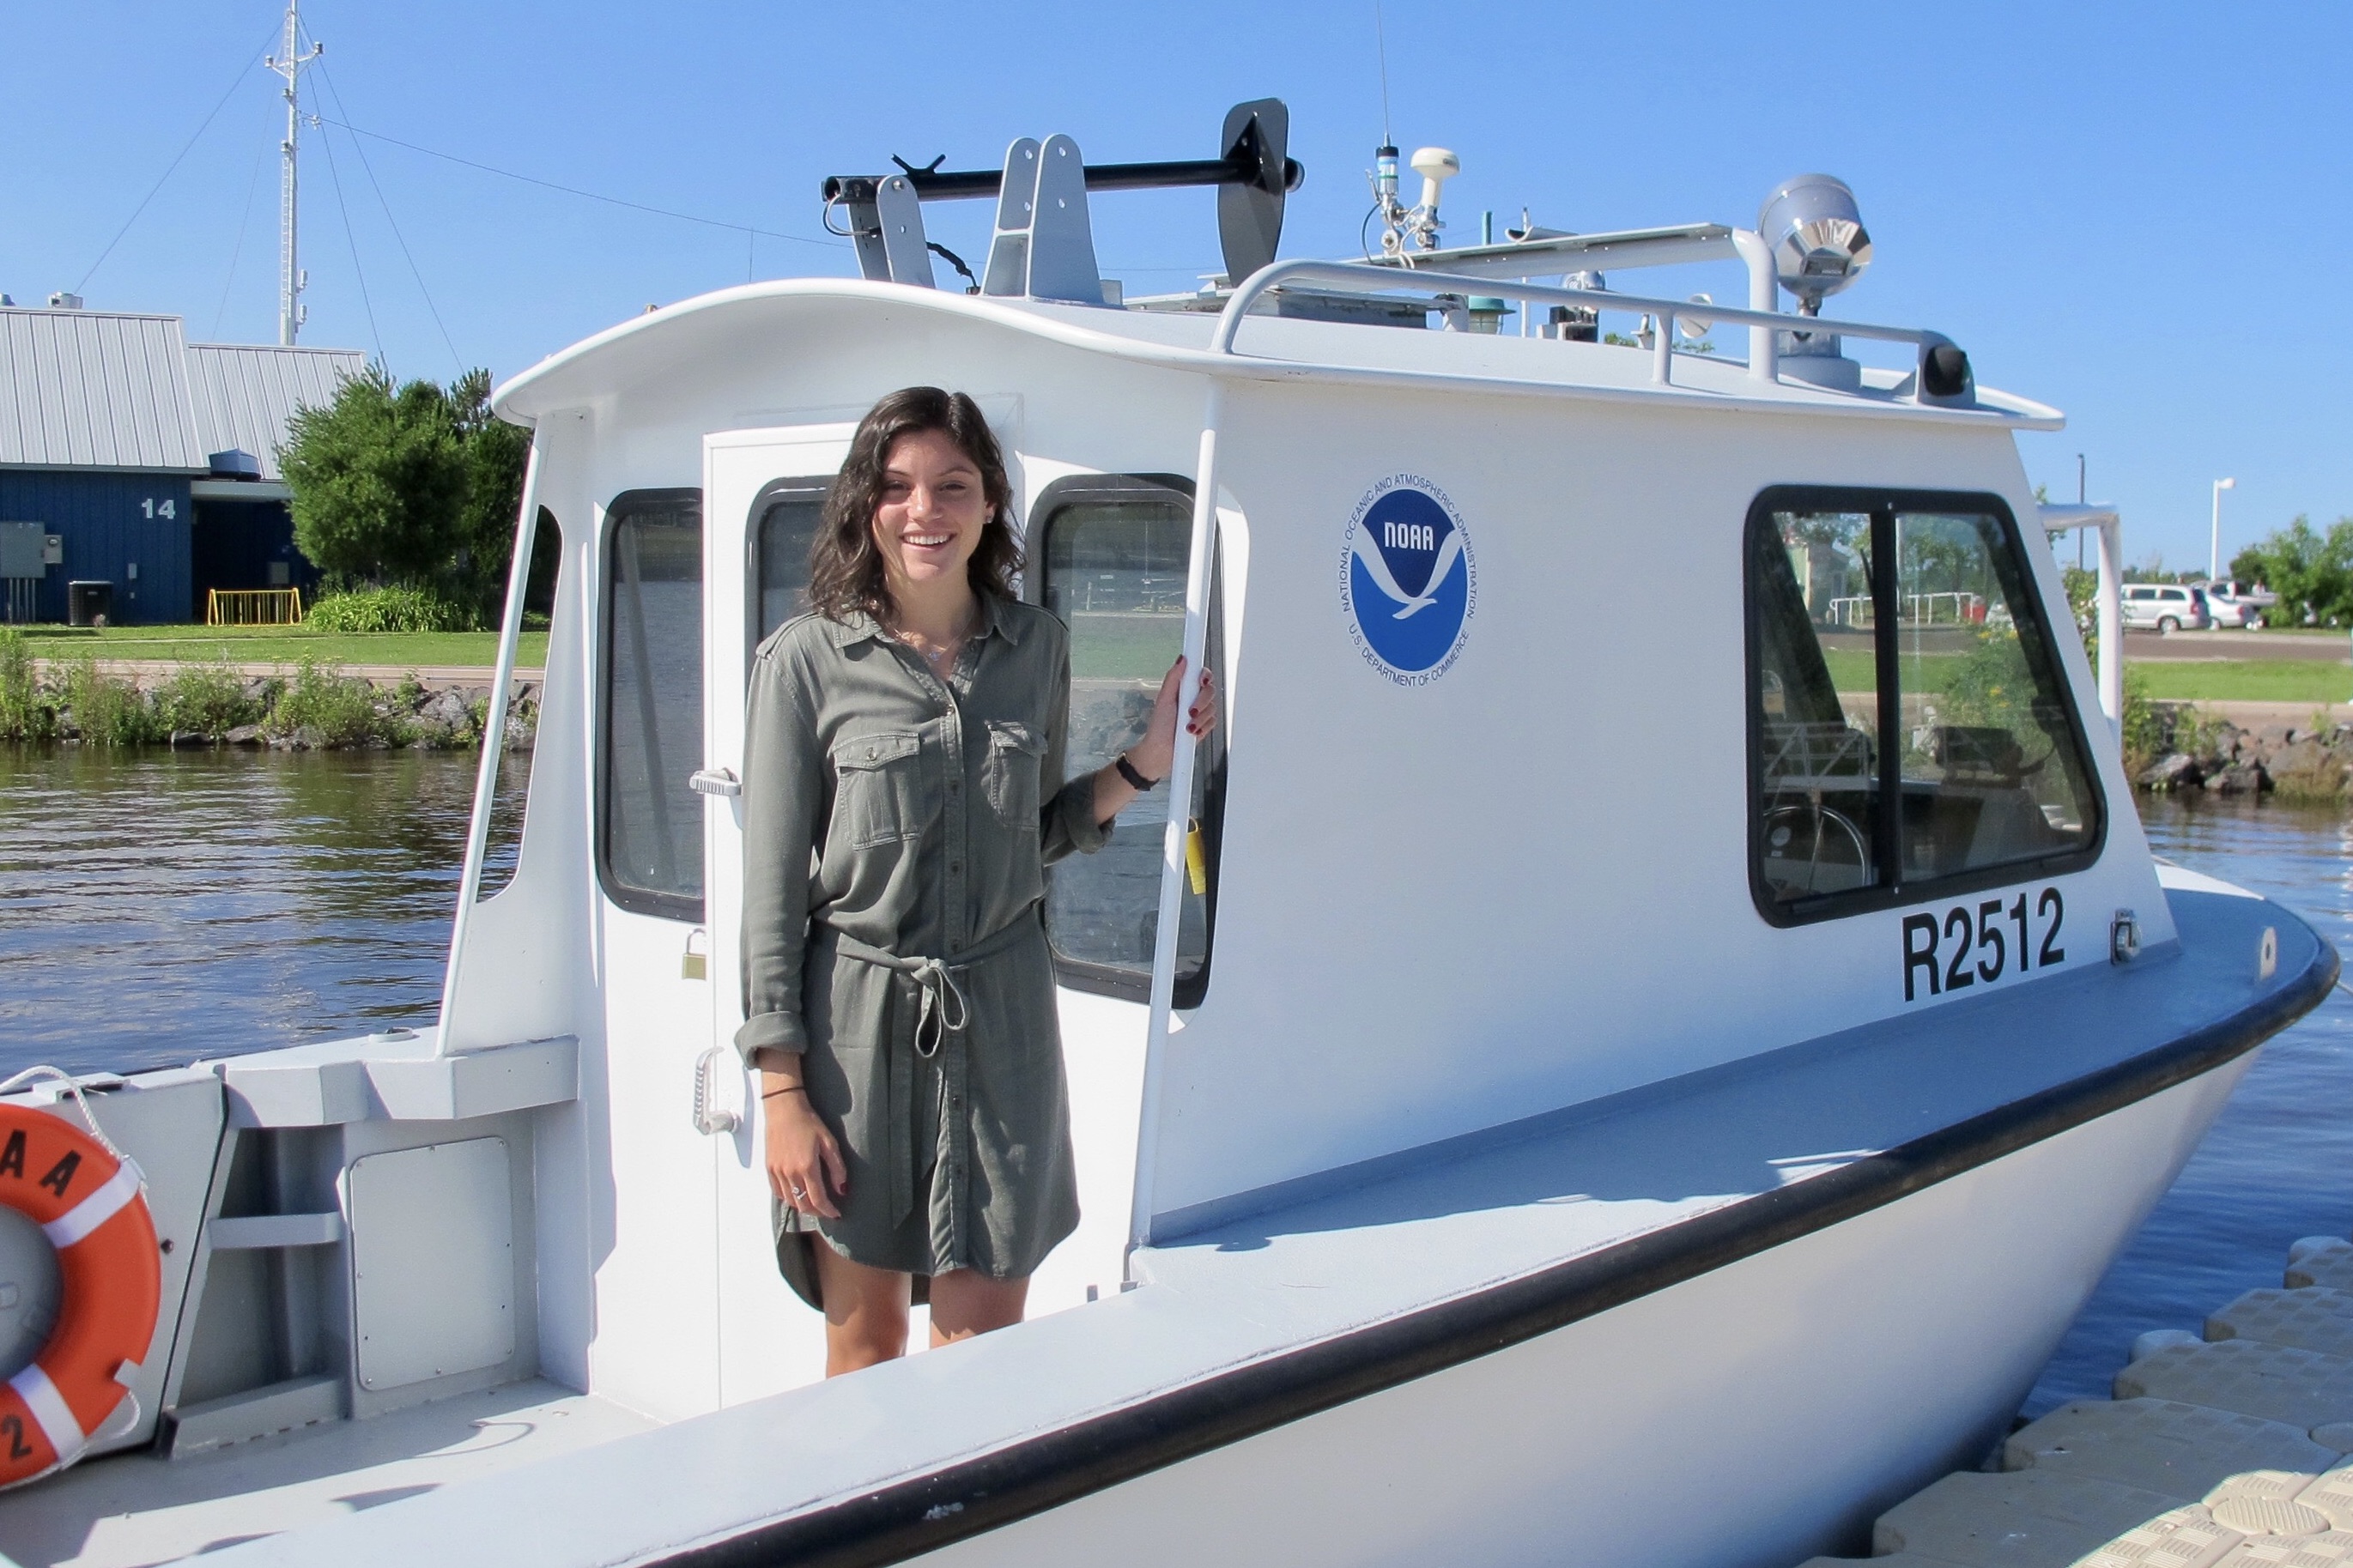 M.A. student Kacey standing on a boat and smiling